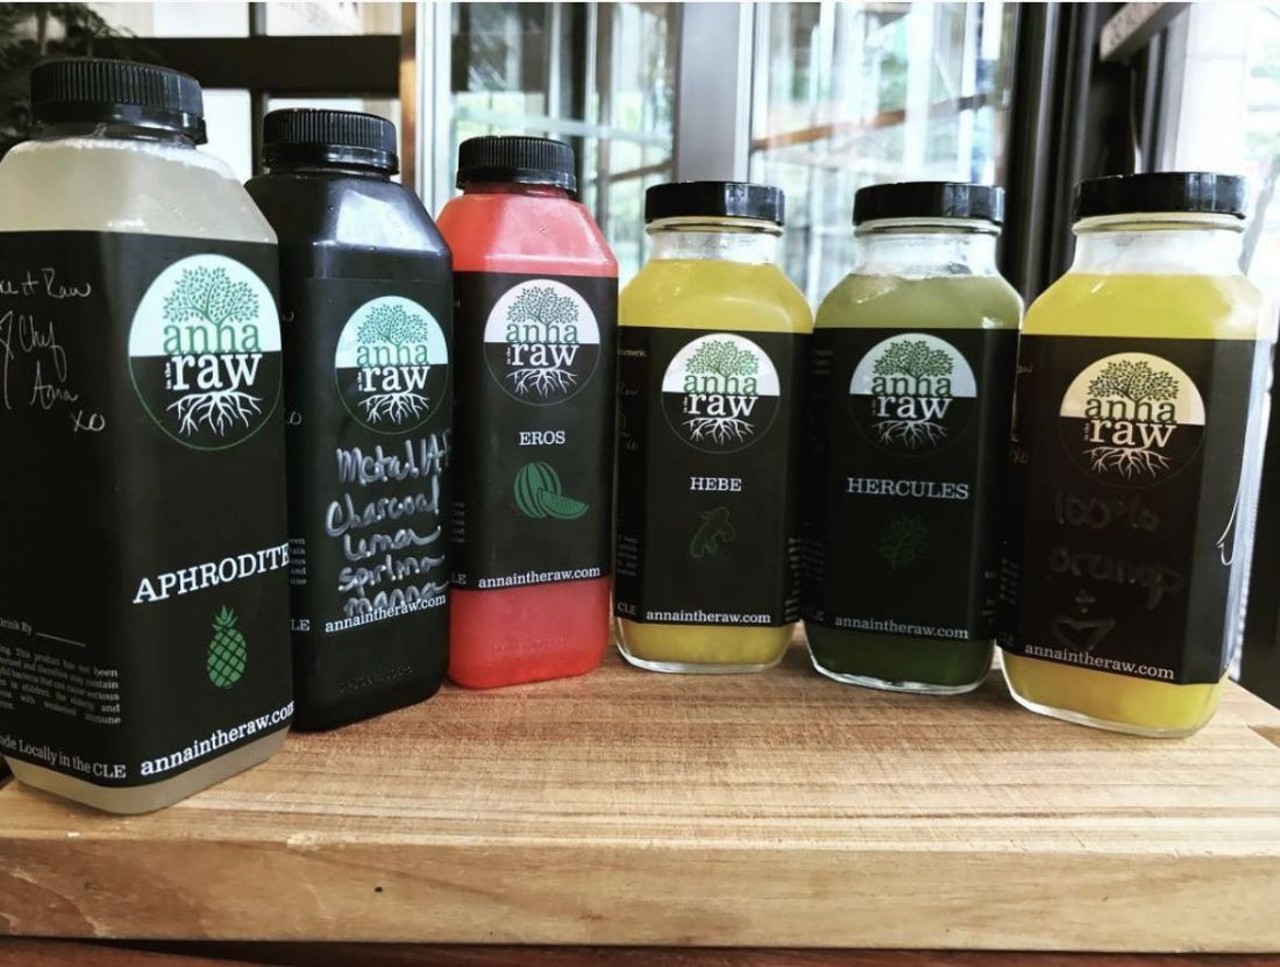  Anna In The Raw
1300 East Ninth St., Cleveland 
Anna Harouvis' cafe that she owns in the lobby of the IMG Building is actually called Good To Go Cafe, but everyone knows Anna better from her line of juices called Anna In The Raw. 
Photo via @AnnaInTheRaw/Instagram